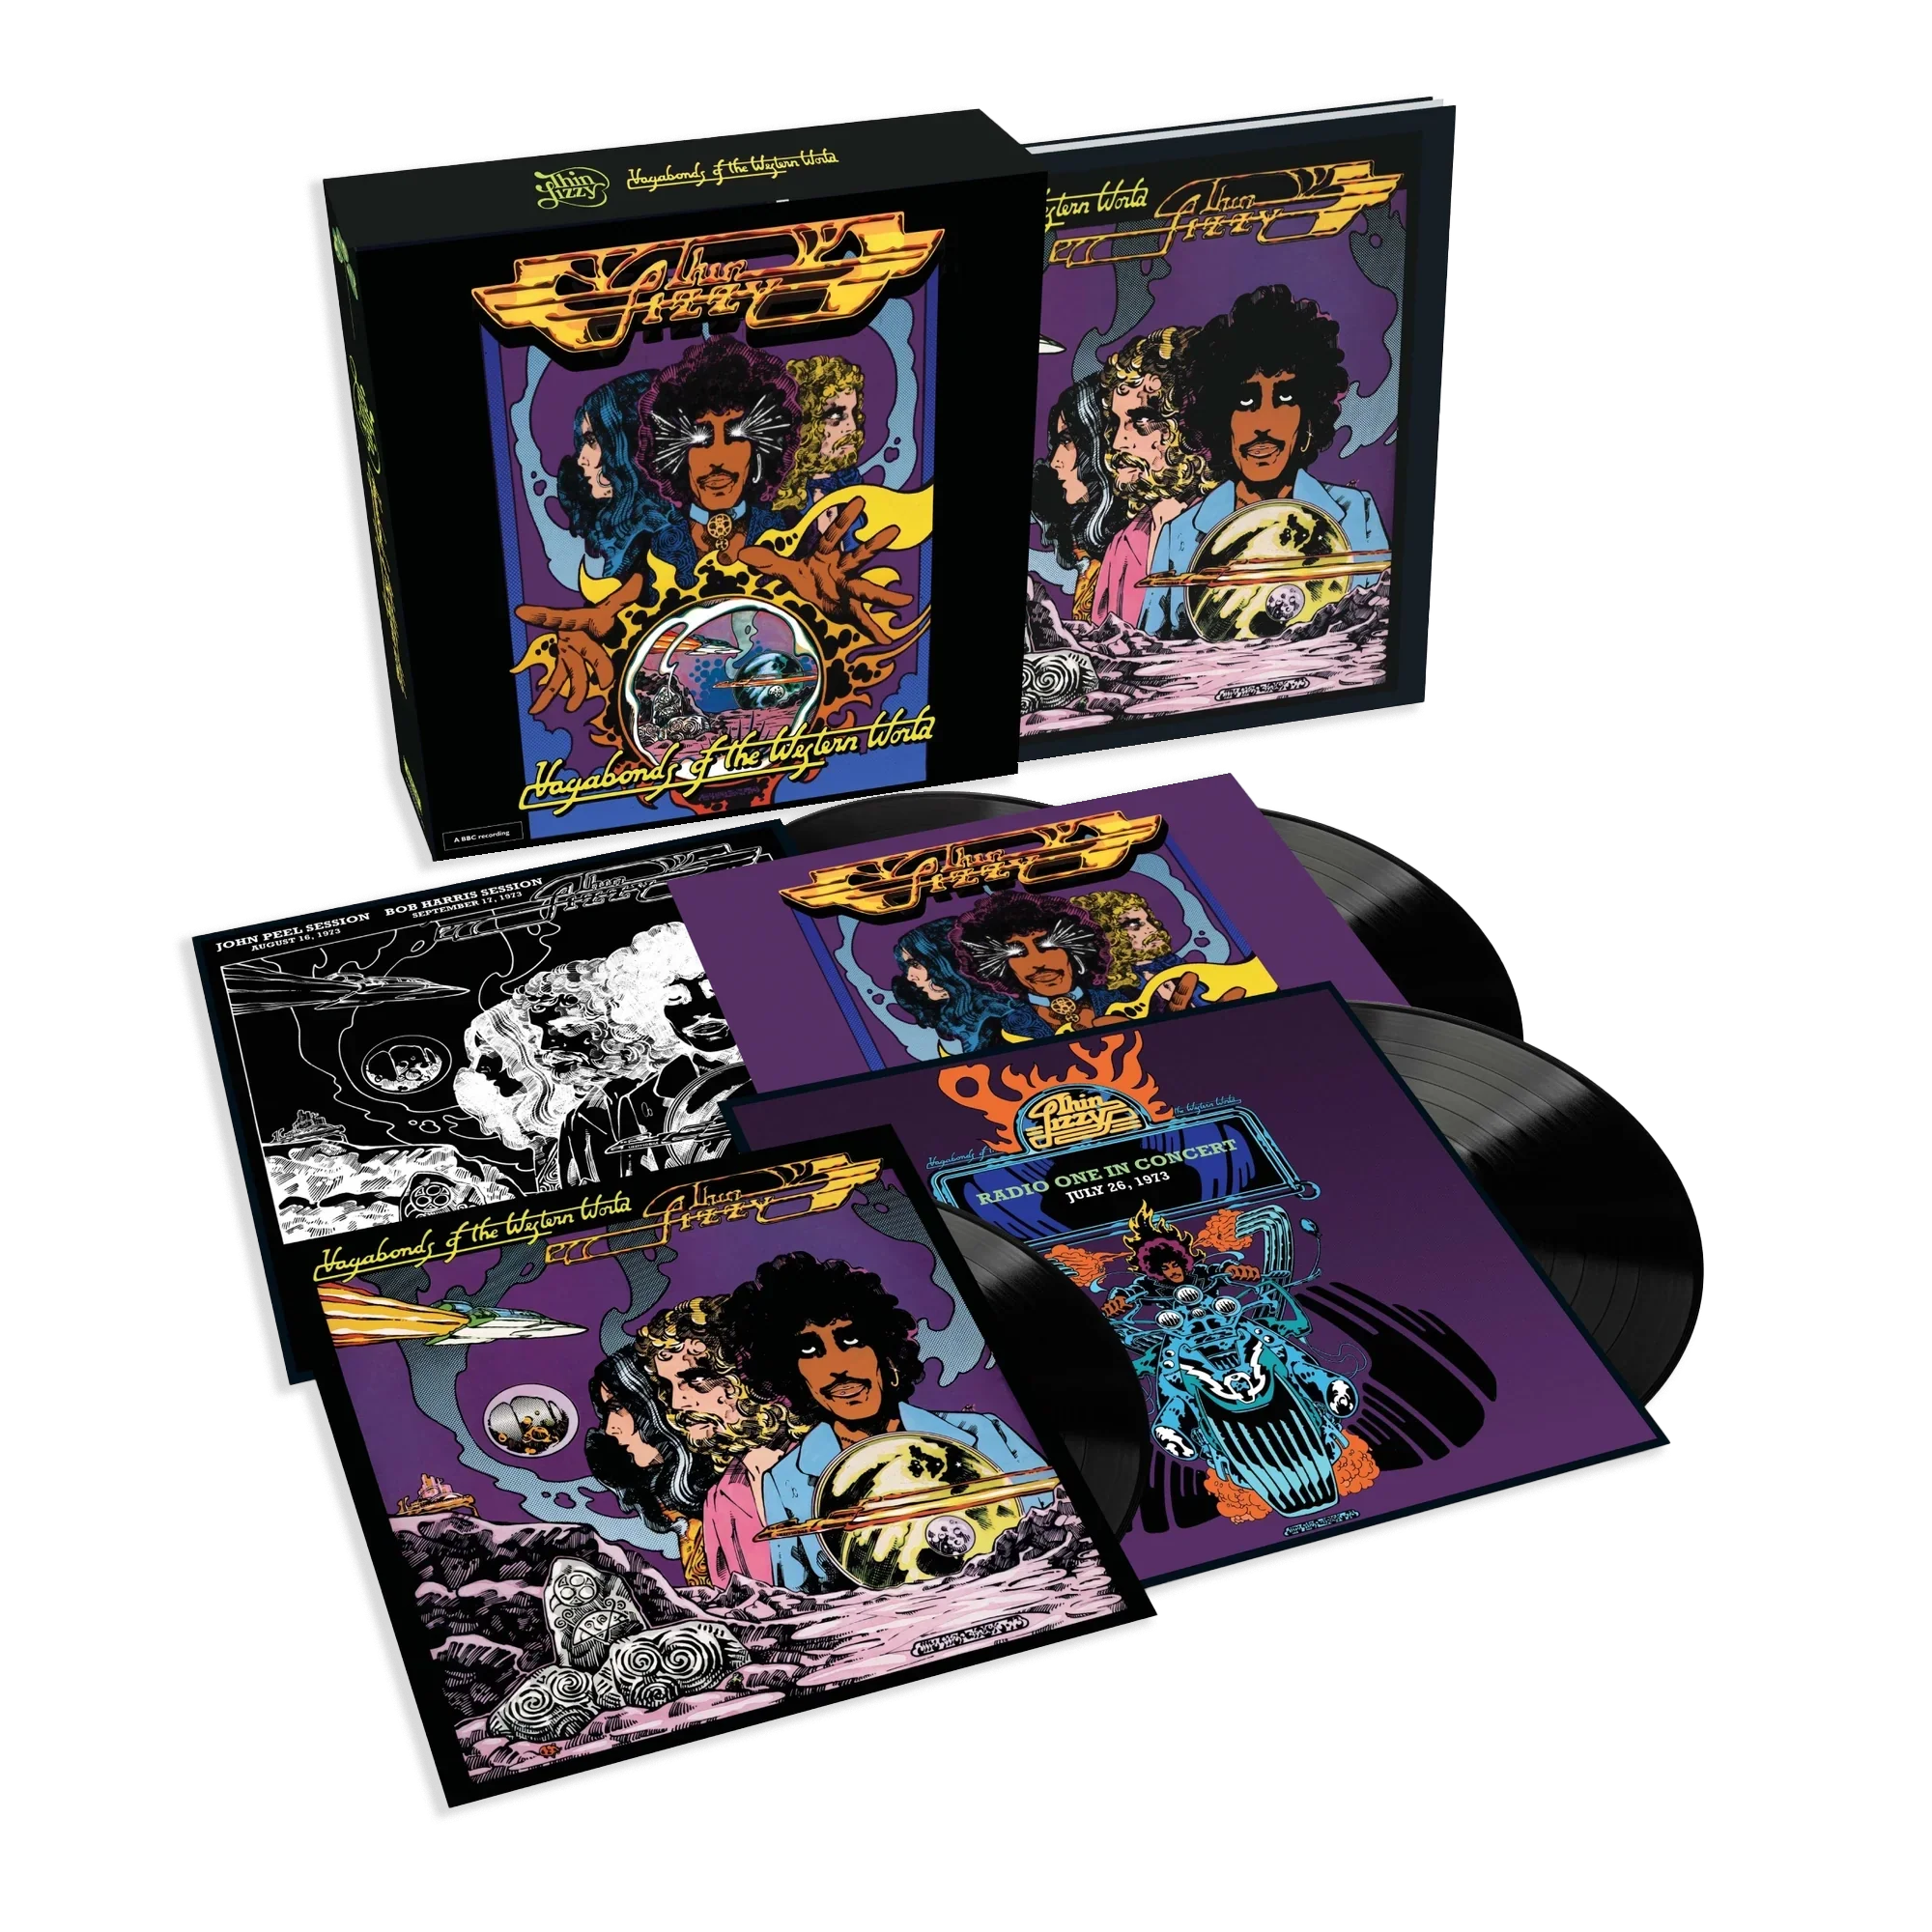 Vagabonds of the Western World: Super Deluxe Vinyl 4LP Box Set, Exclusive Artcard (signed by Eric Bell) + Jim Fitzpatrick Poster Set